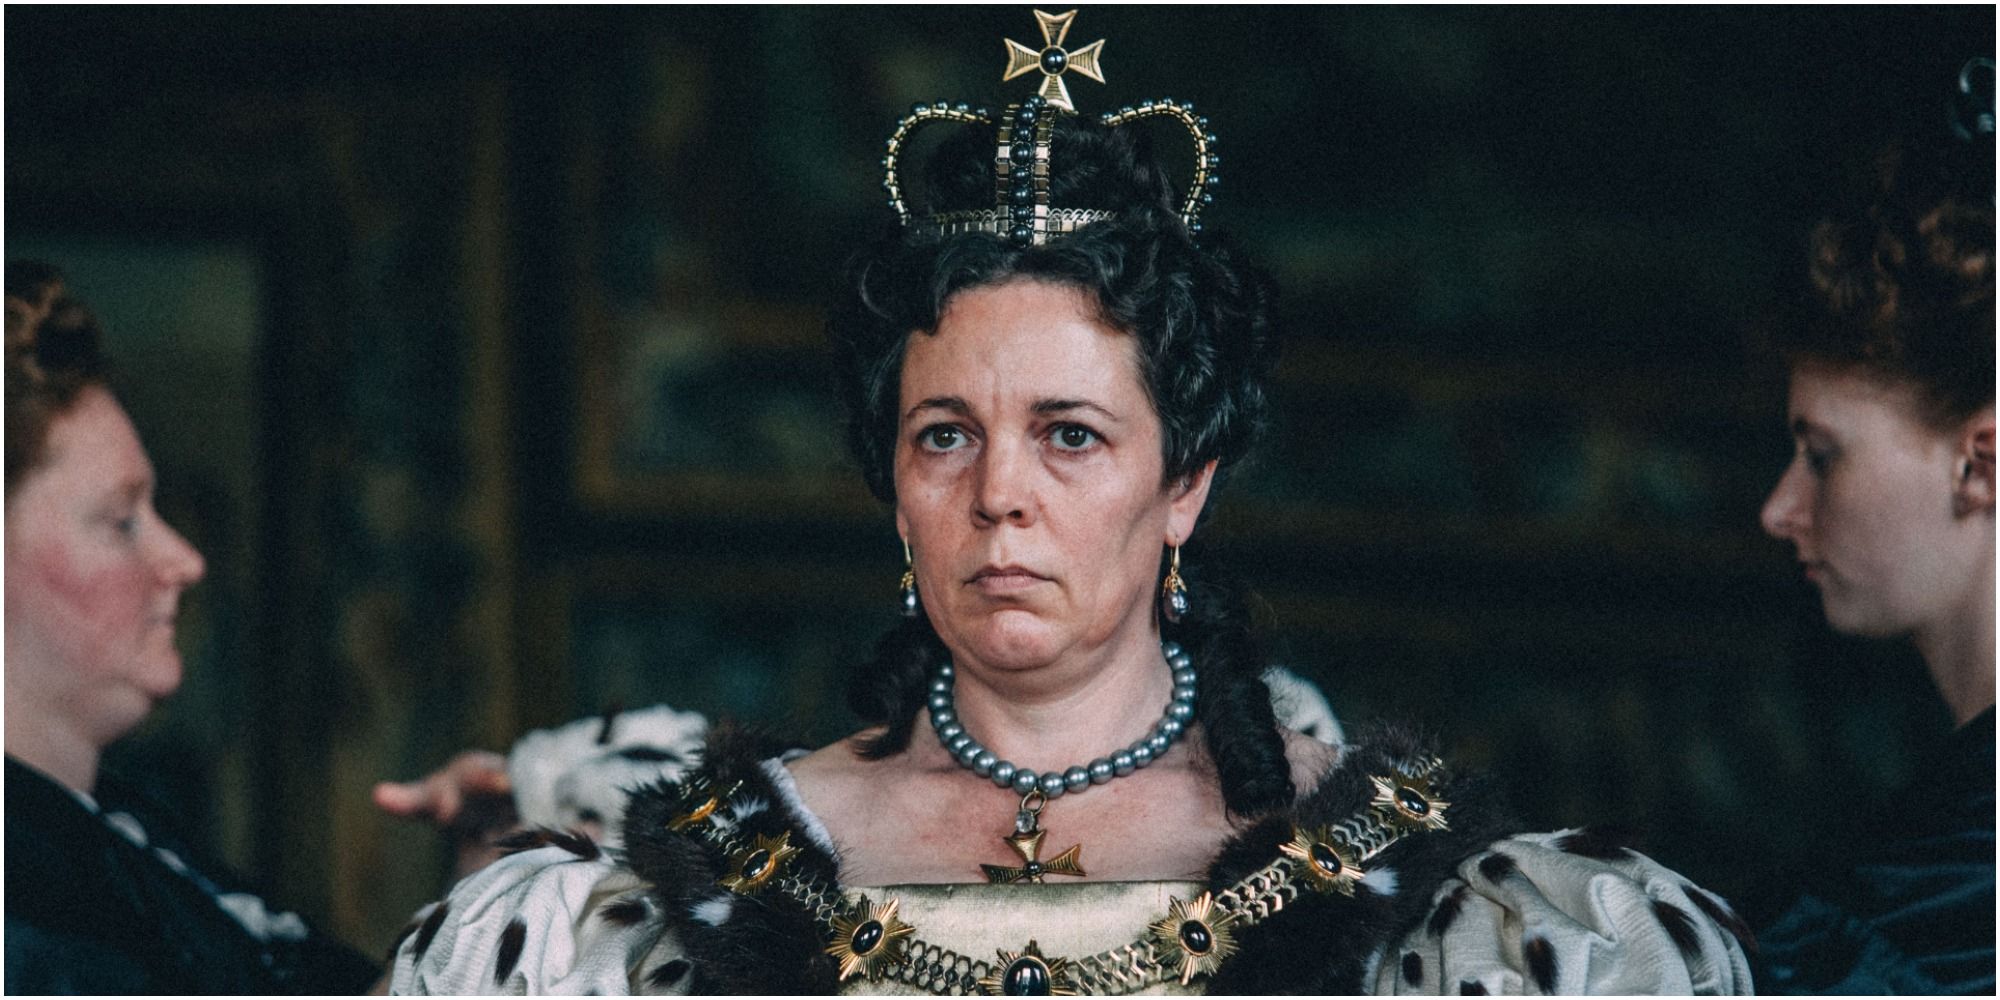 Olvia Coleman stares while dressed in royal garb in The Favourite.